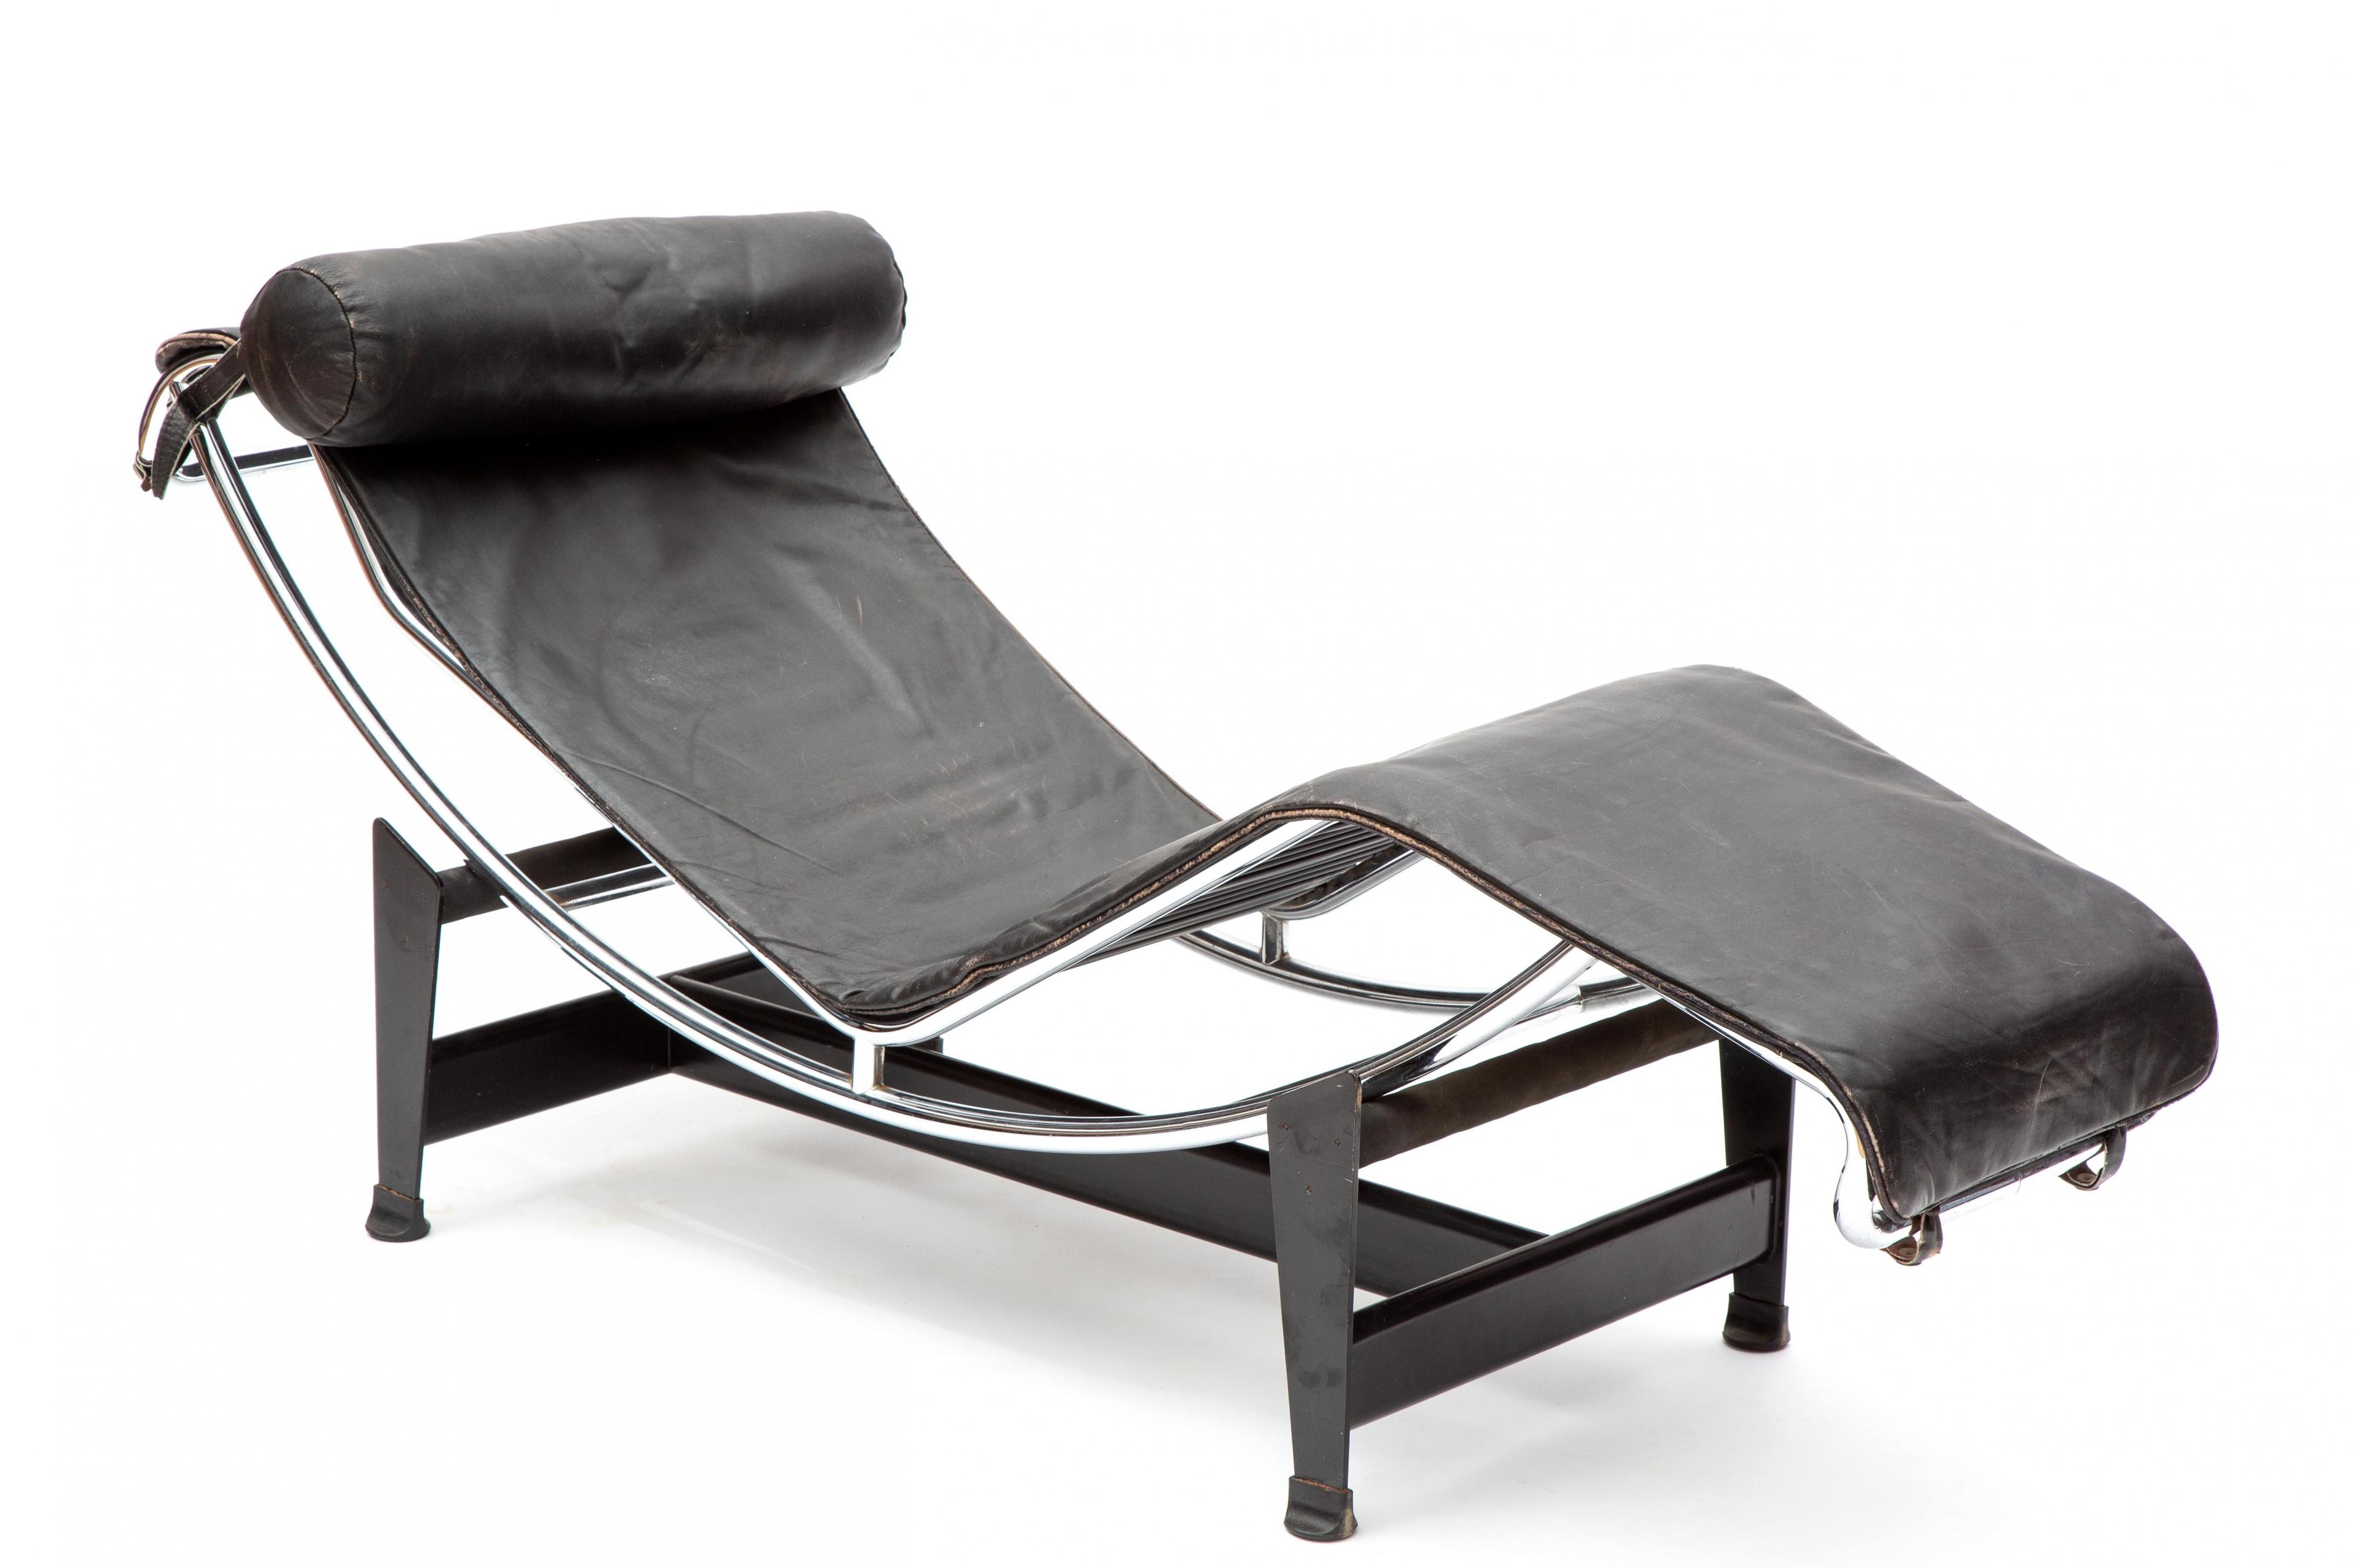 Charlotte Perriand, Lounge chair B306 (1935), Available for Sale